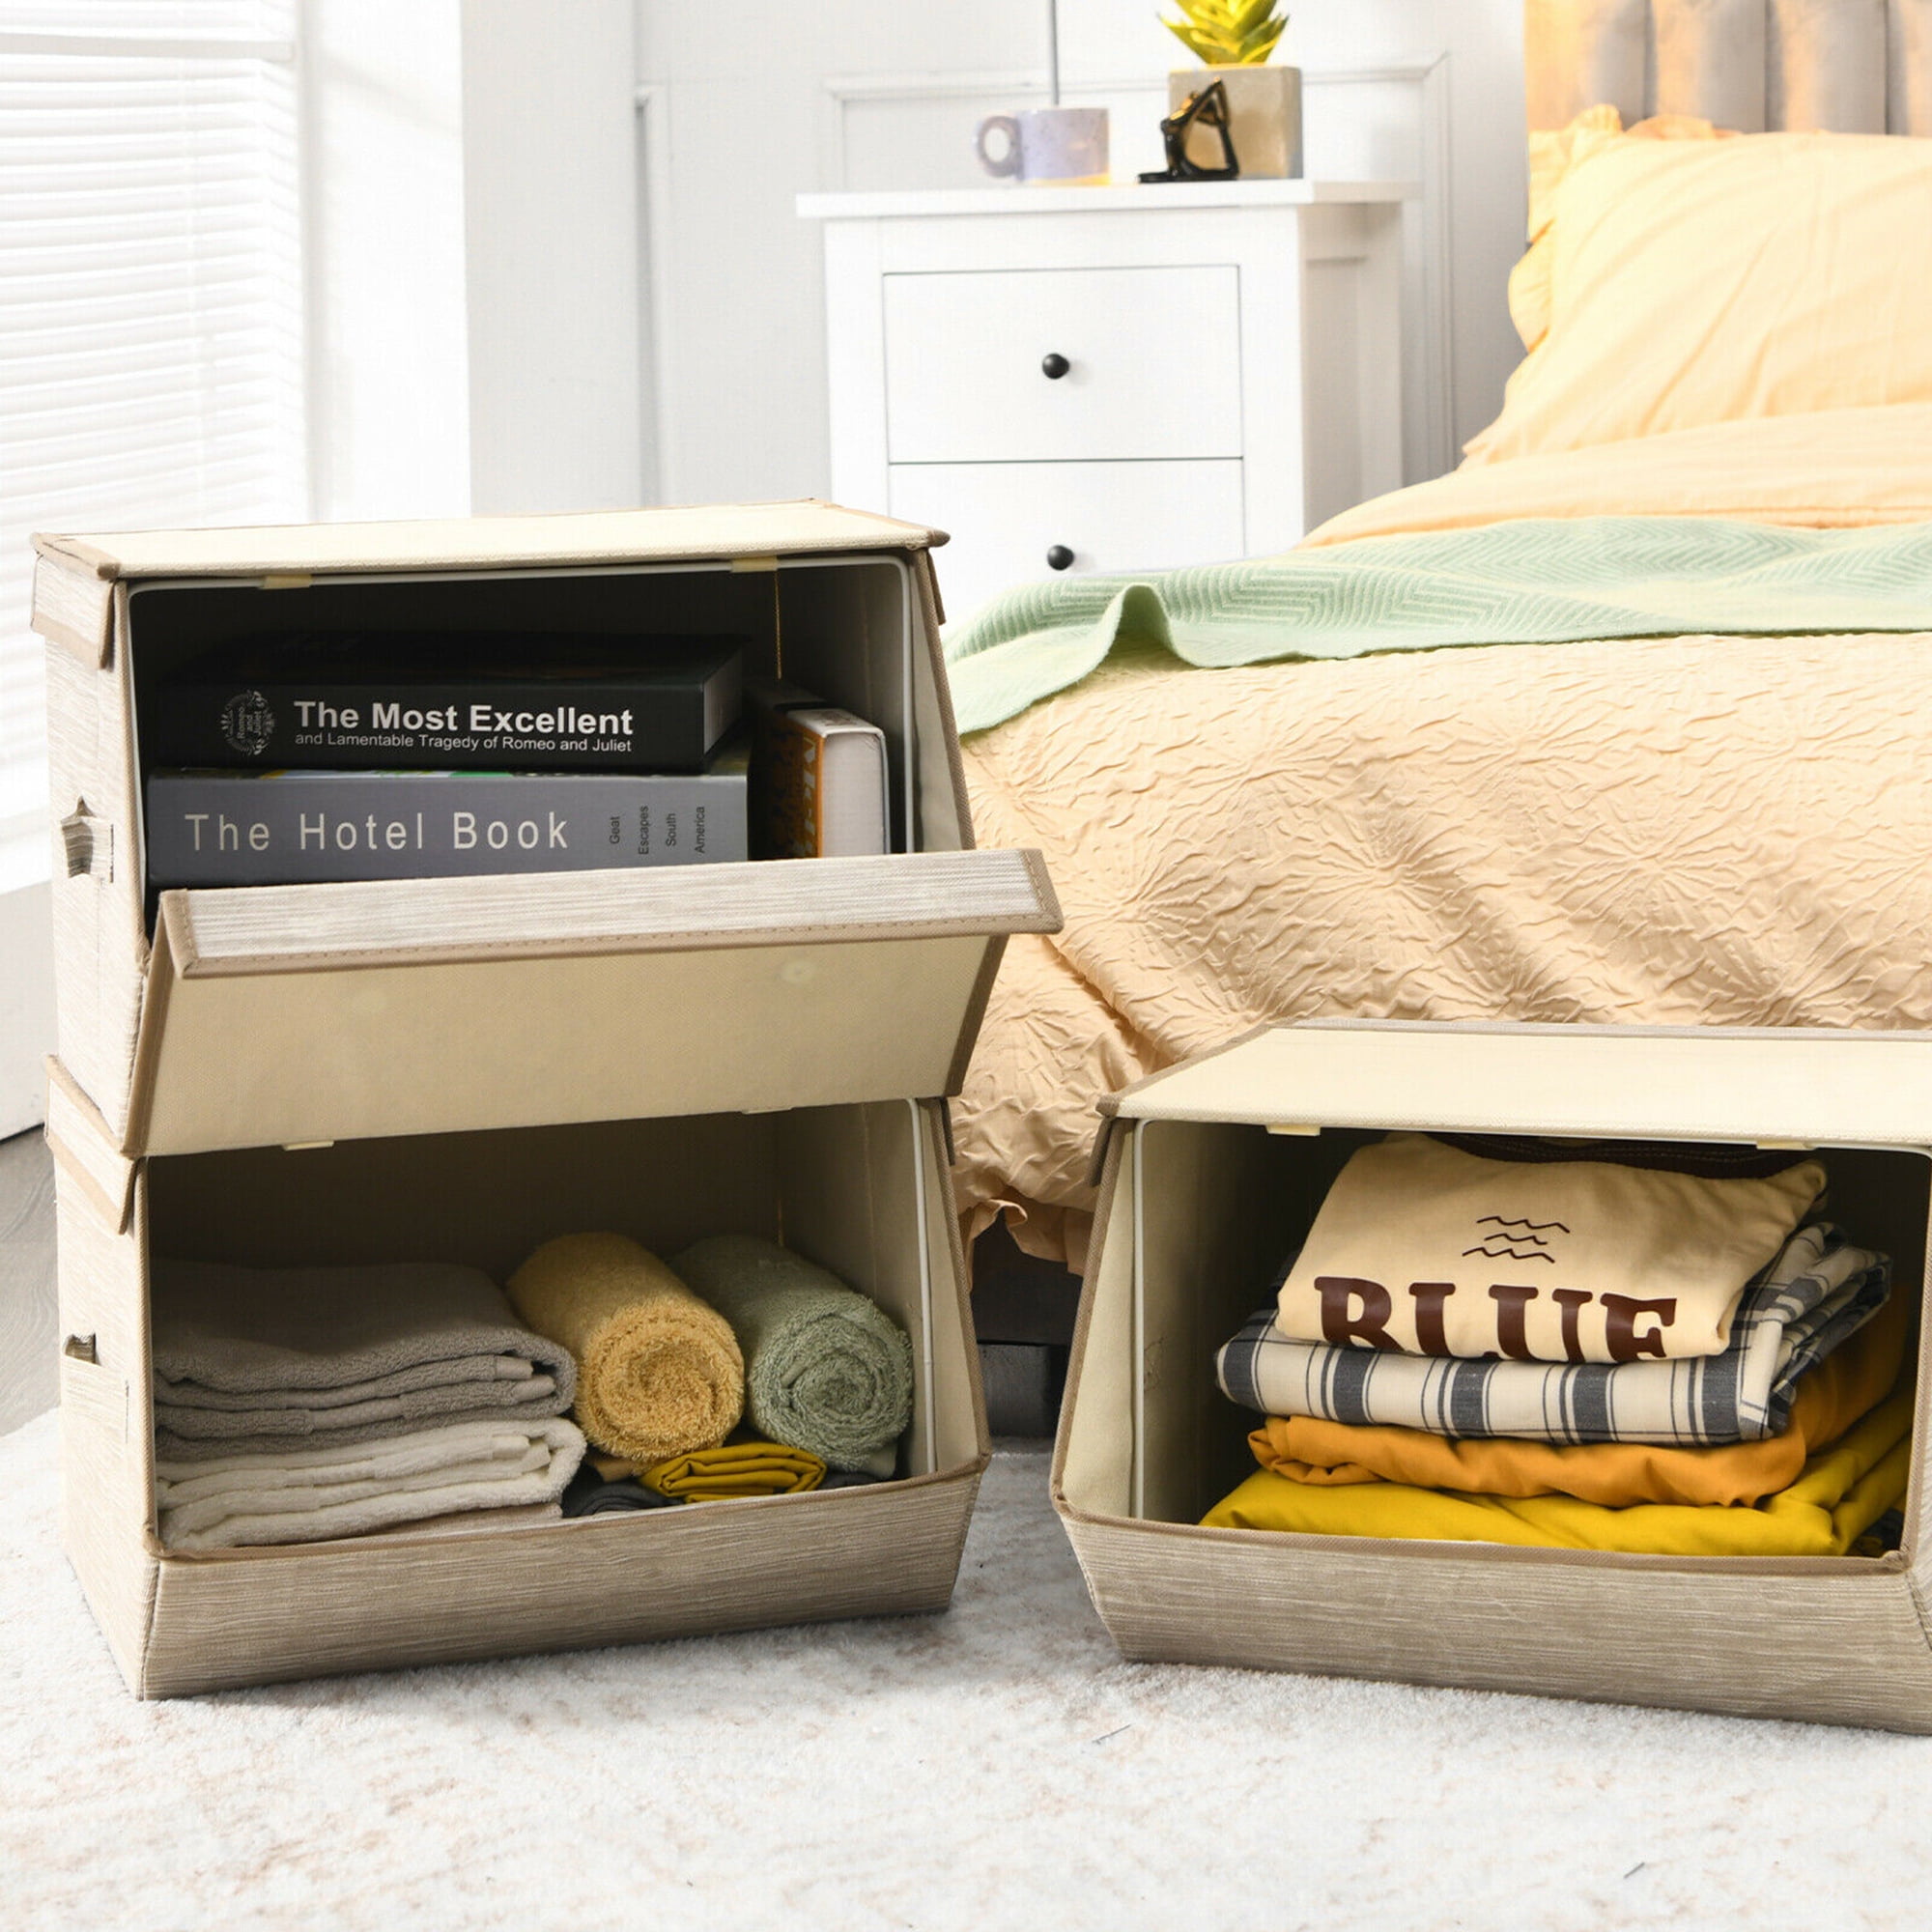 Costway Stackable Large Bins Cubes W/Lids Storage Organizers W/Linen&Oxford  Fabric 4 Sets